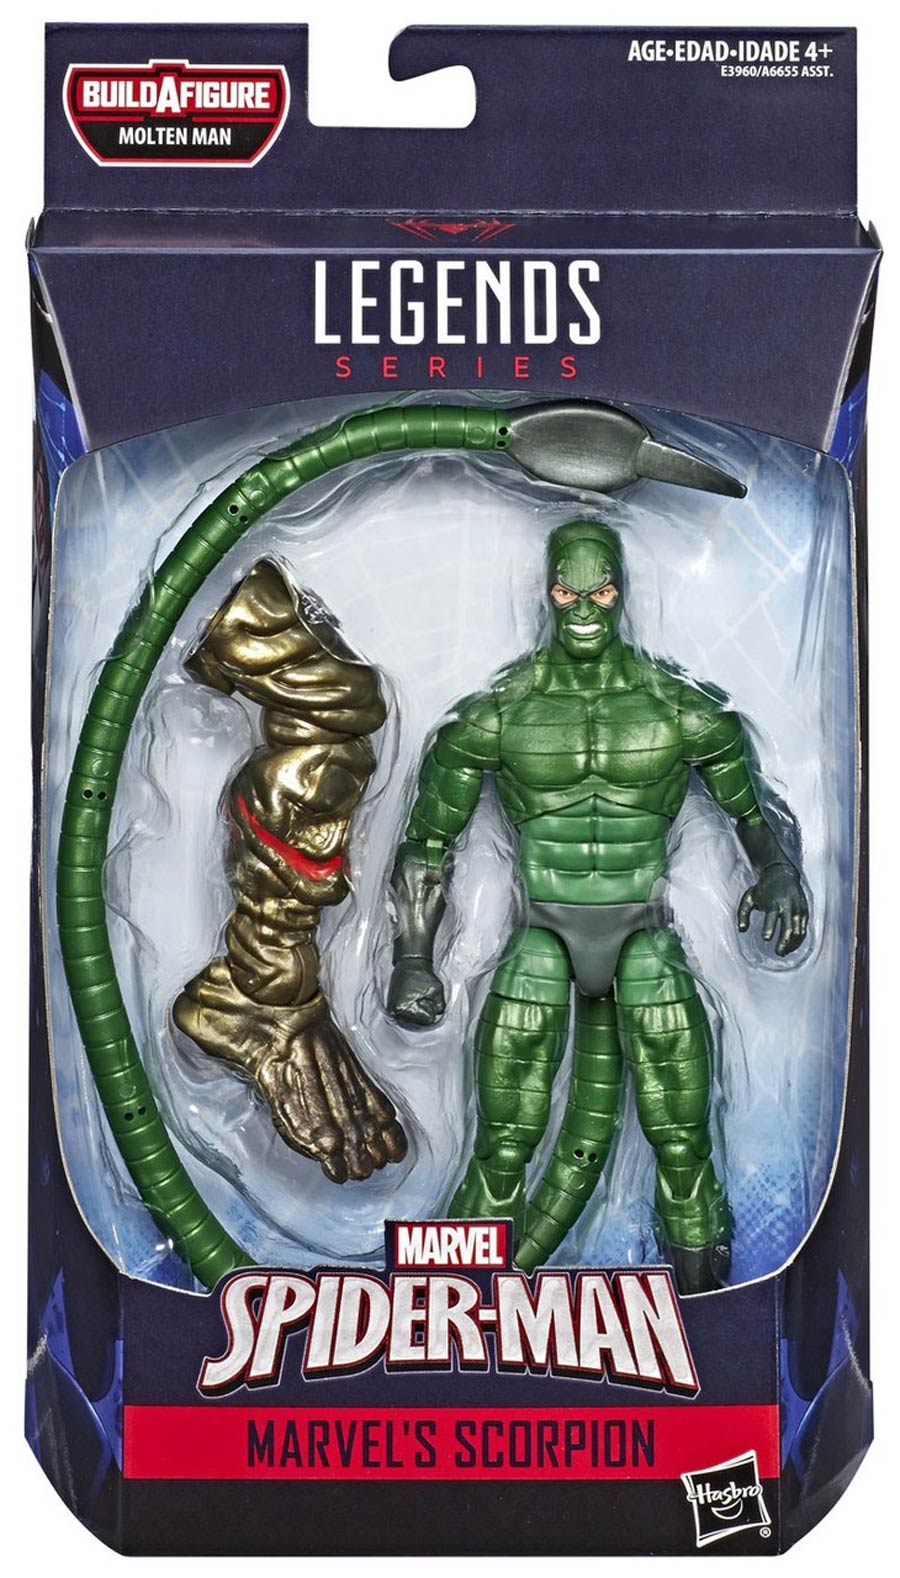 Spider-Man Far From Home Legends 2019 6-Inch Action Figure - Scorpion